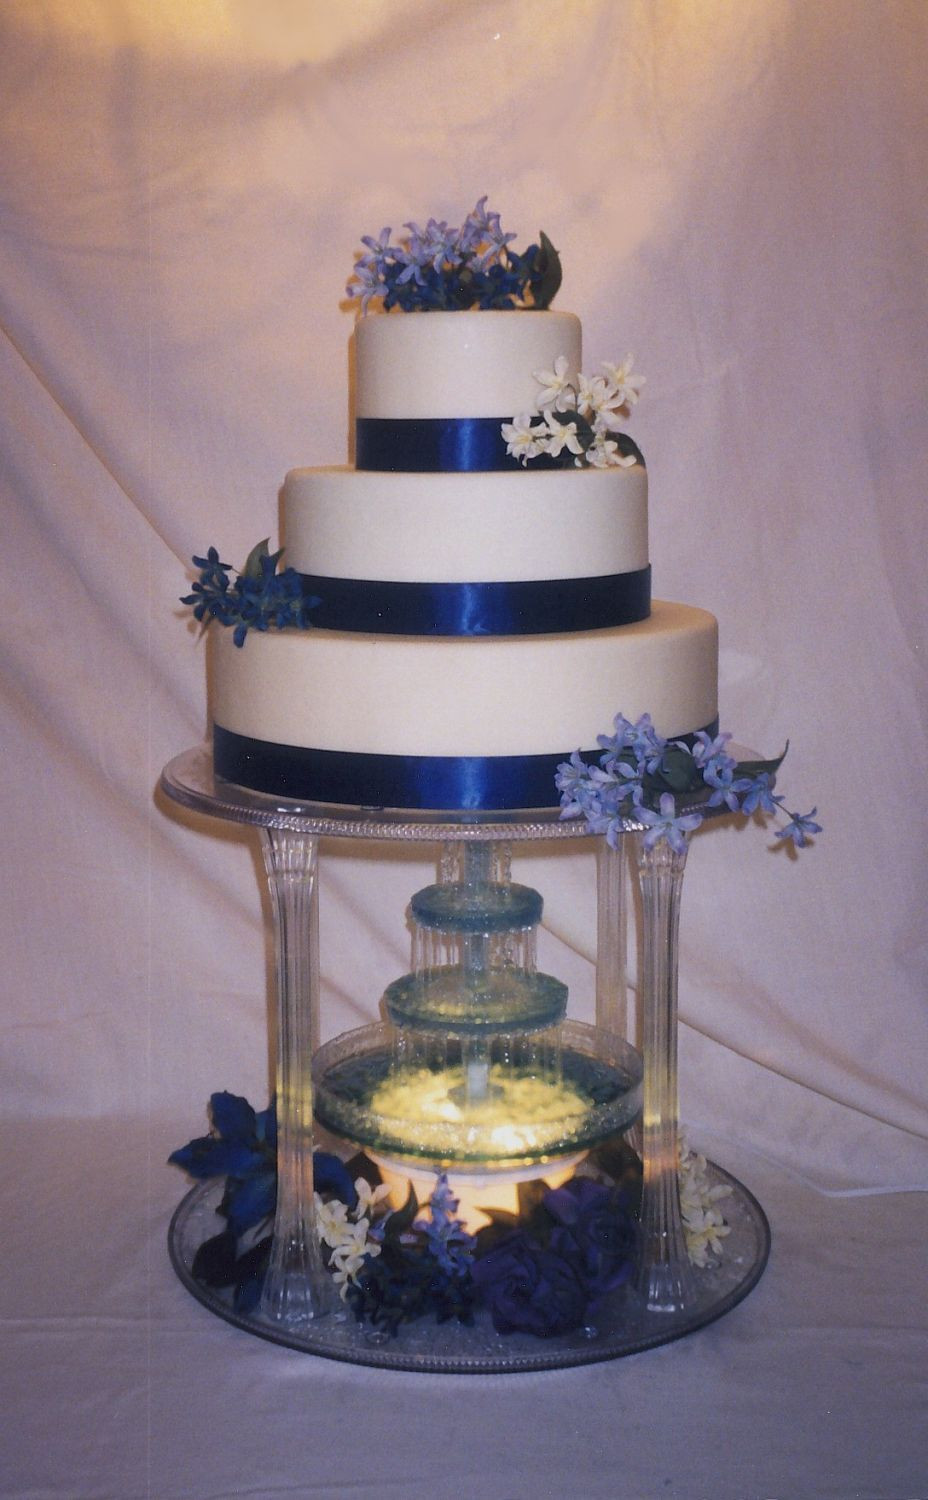 Water Fountain Wedding Cakes
 wedding cakes with fountains Original Embed